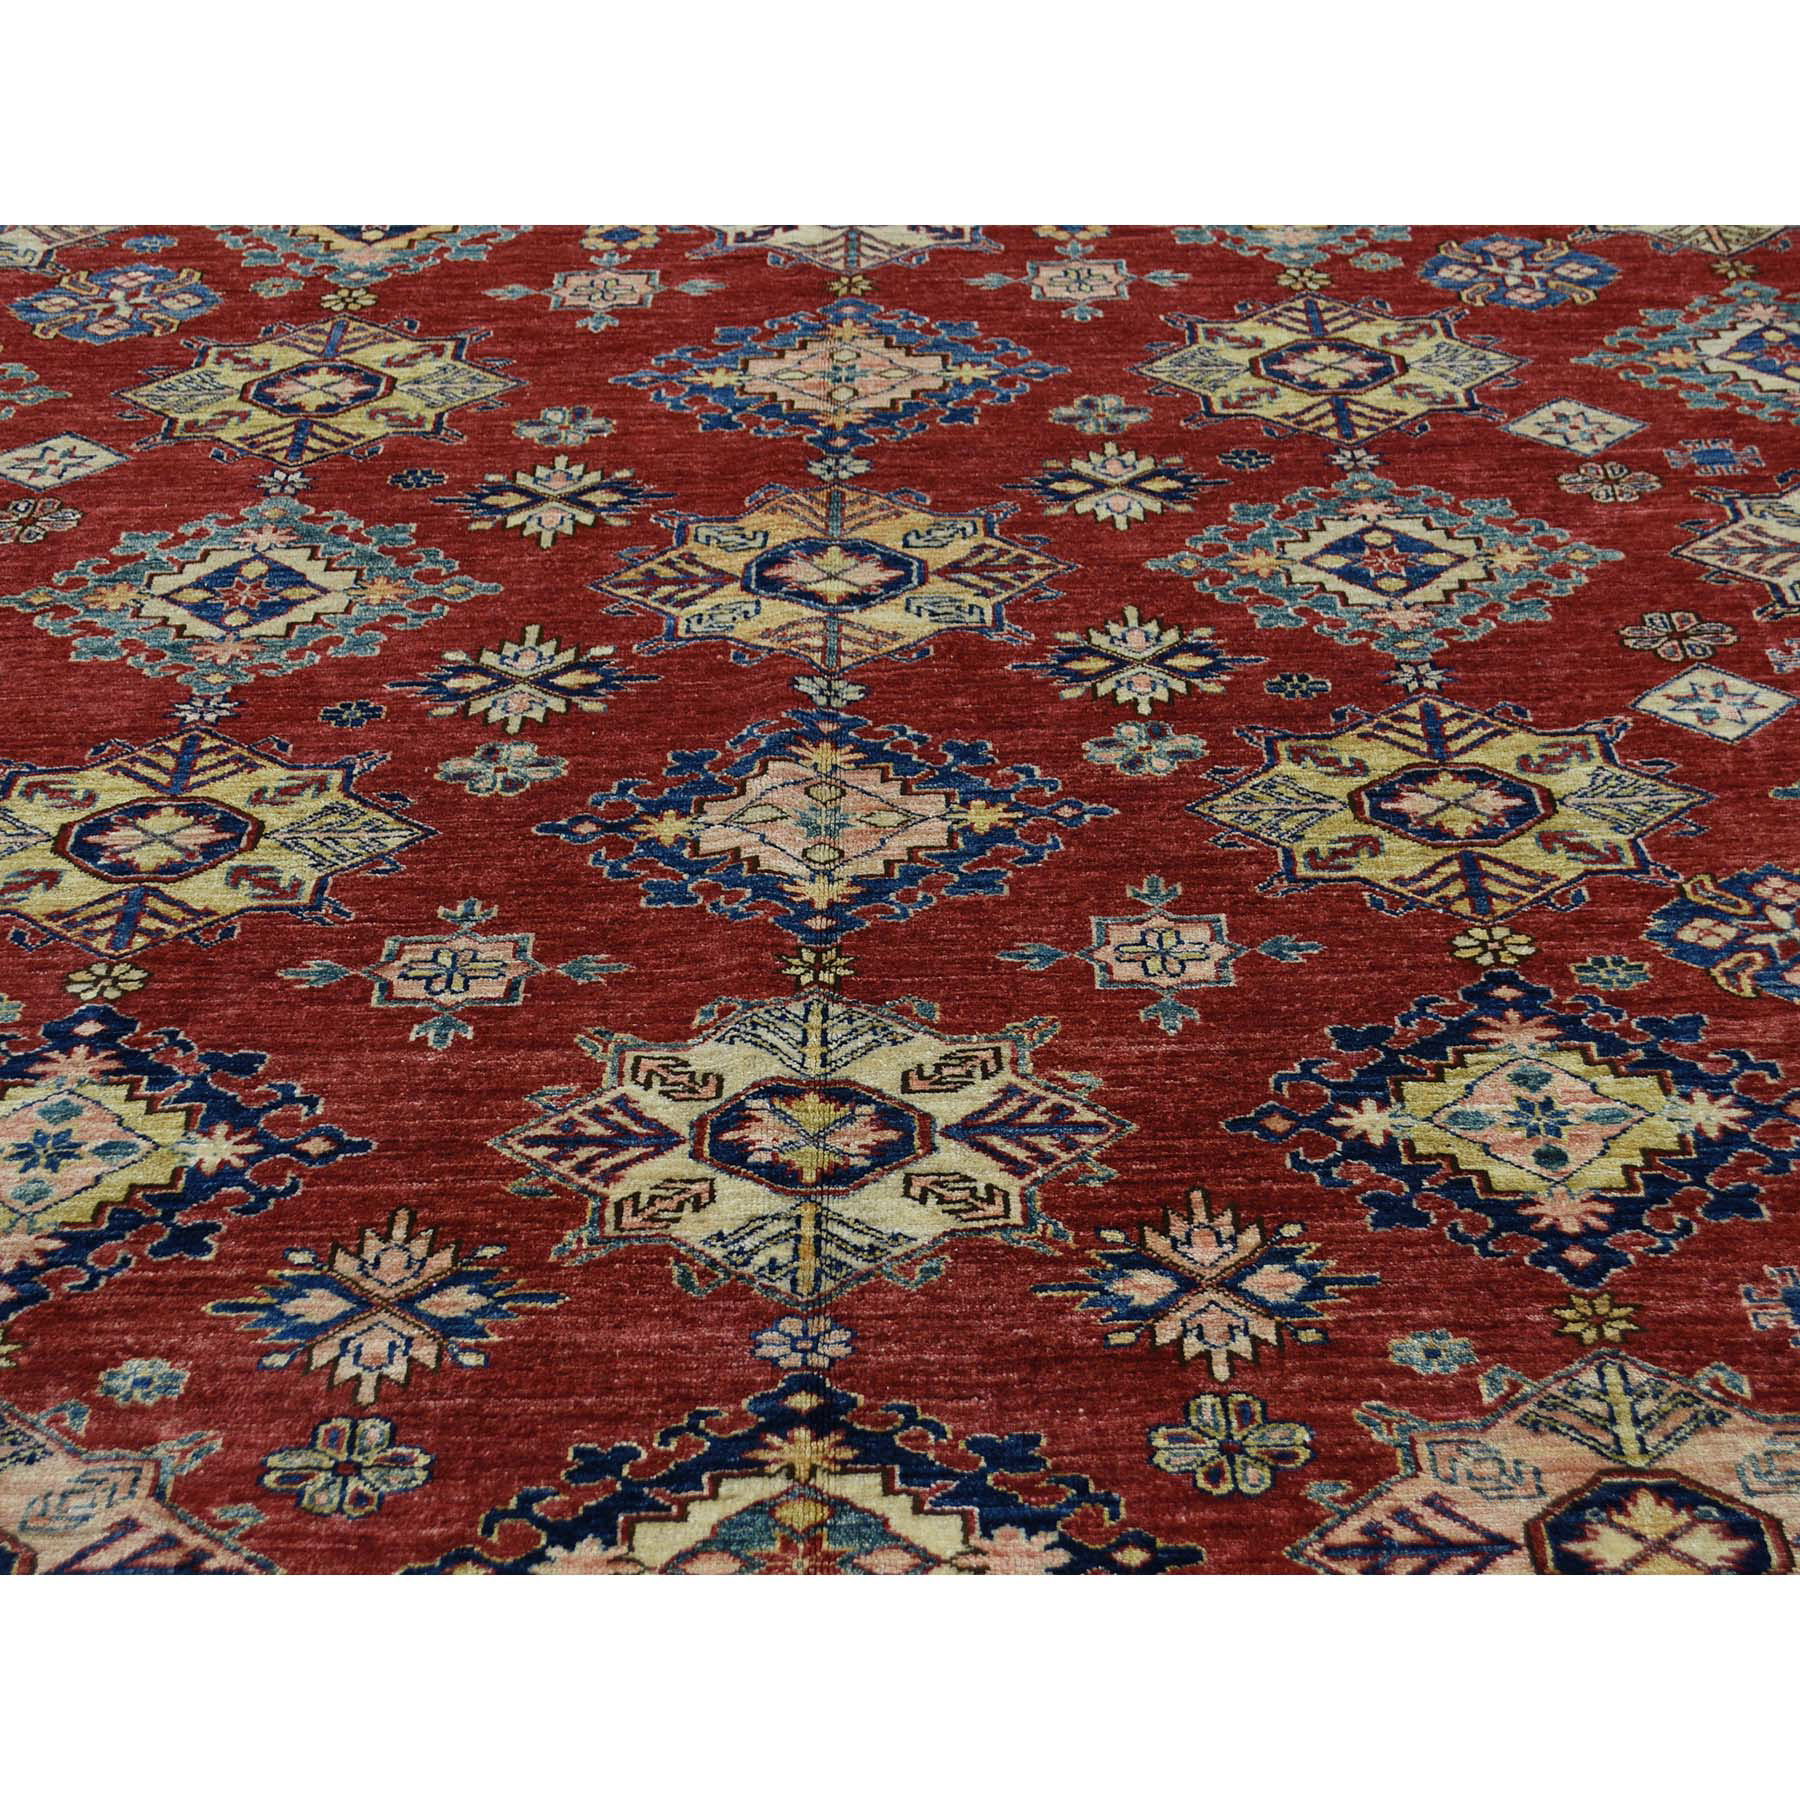 13-2 x13-9  Hand-Knotted Pure Wool Super Kazak Oversized Square Rug 